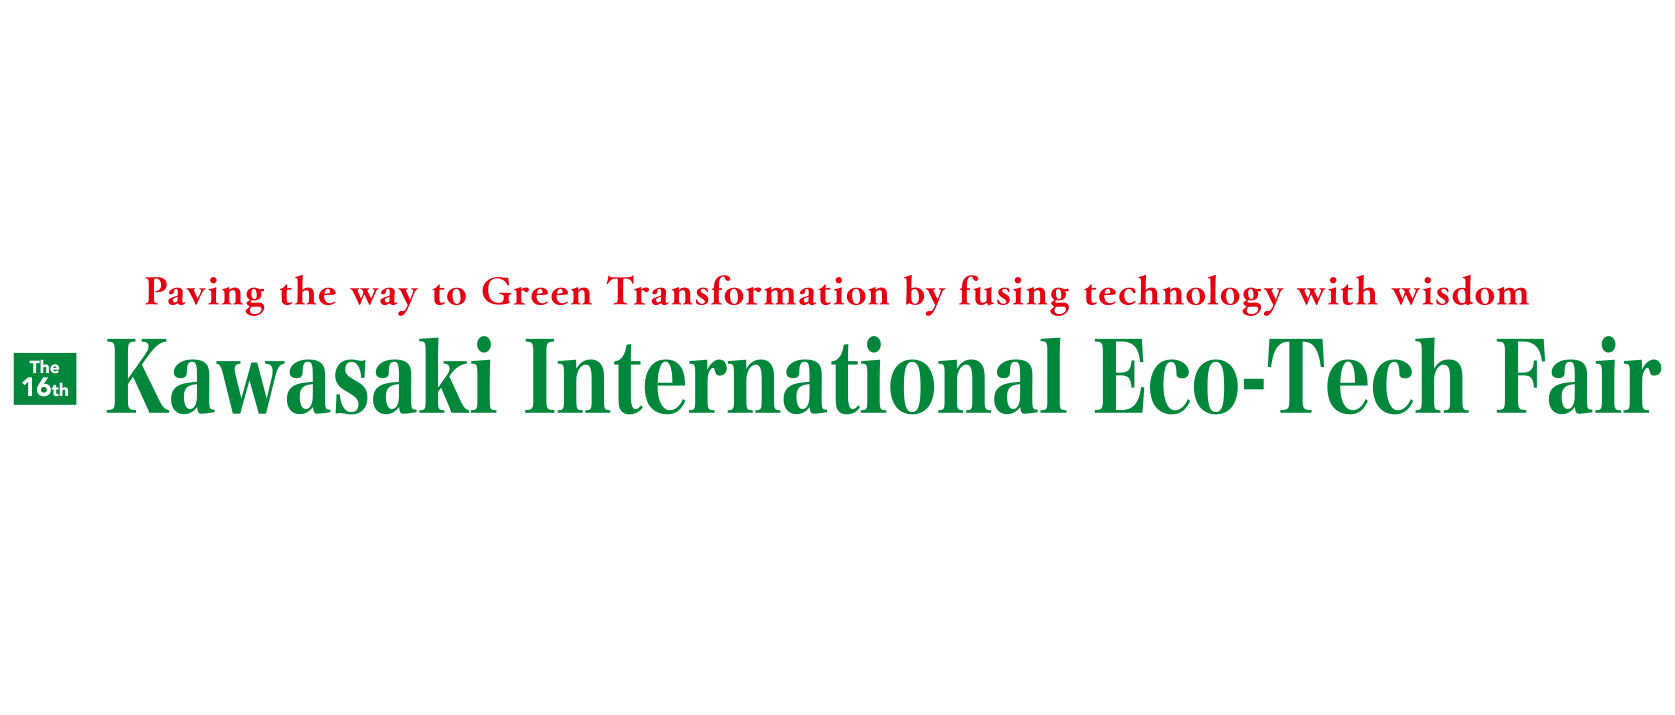 The 16th Kawasaki International Eco-Tech Fair Paving the way to Green Transformation by fusing technology with wisdom